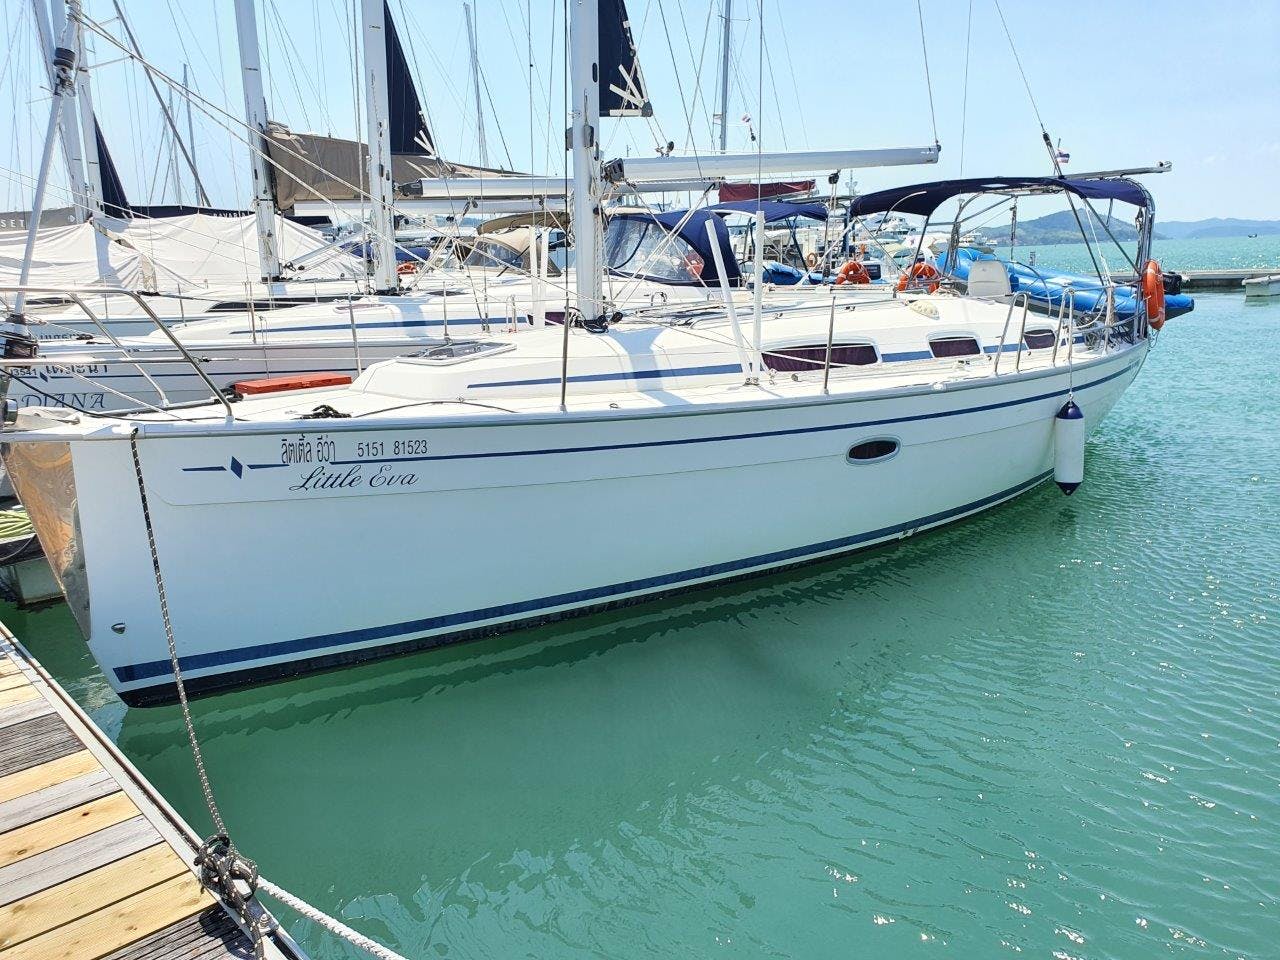 Book Bavaria 34 Cruiser - 2 cab. Sailing yacht for bareboat charter in Phuket, Yacht Haven Marina, Phuket, Thailand  with TripYacht!, picture 1